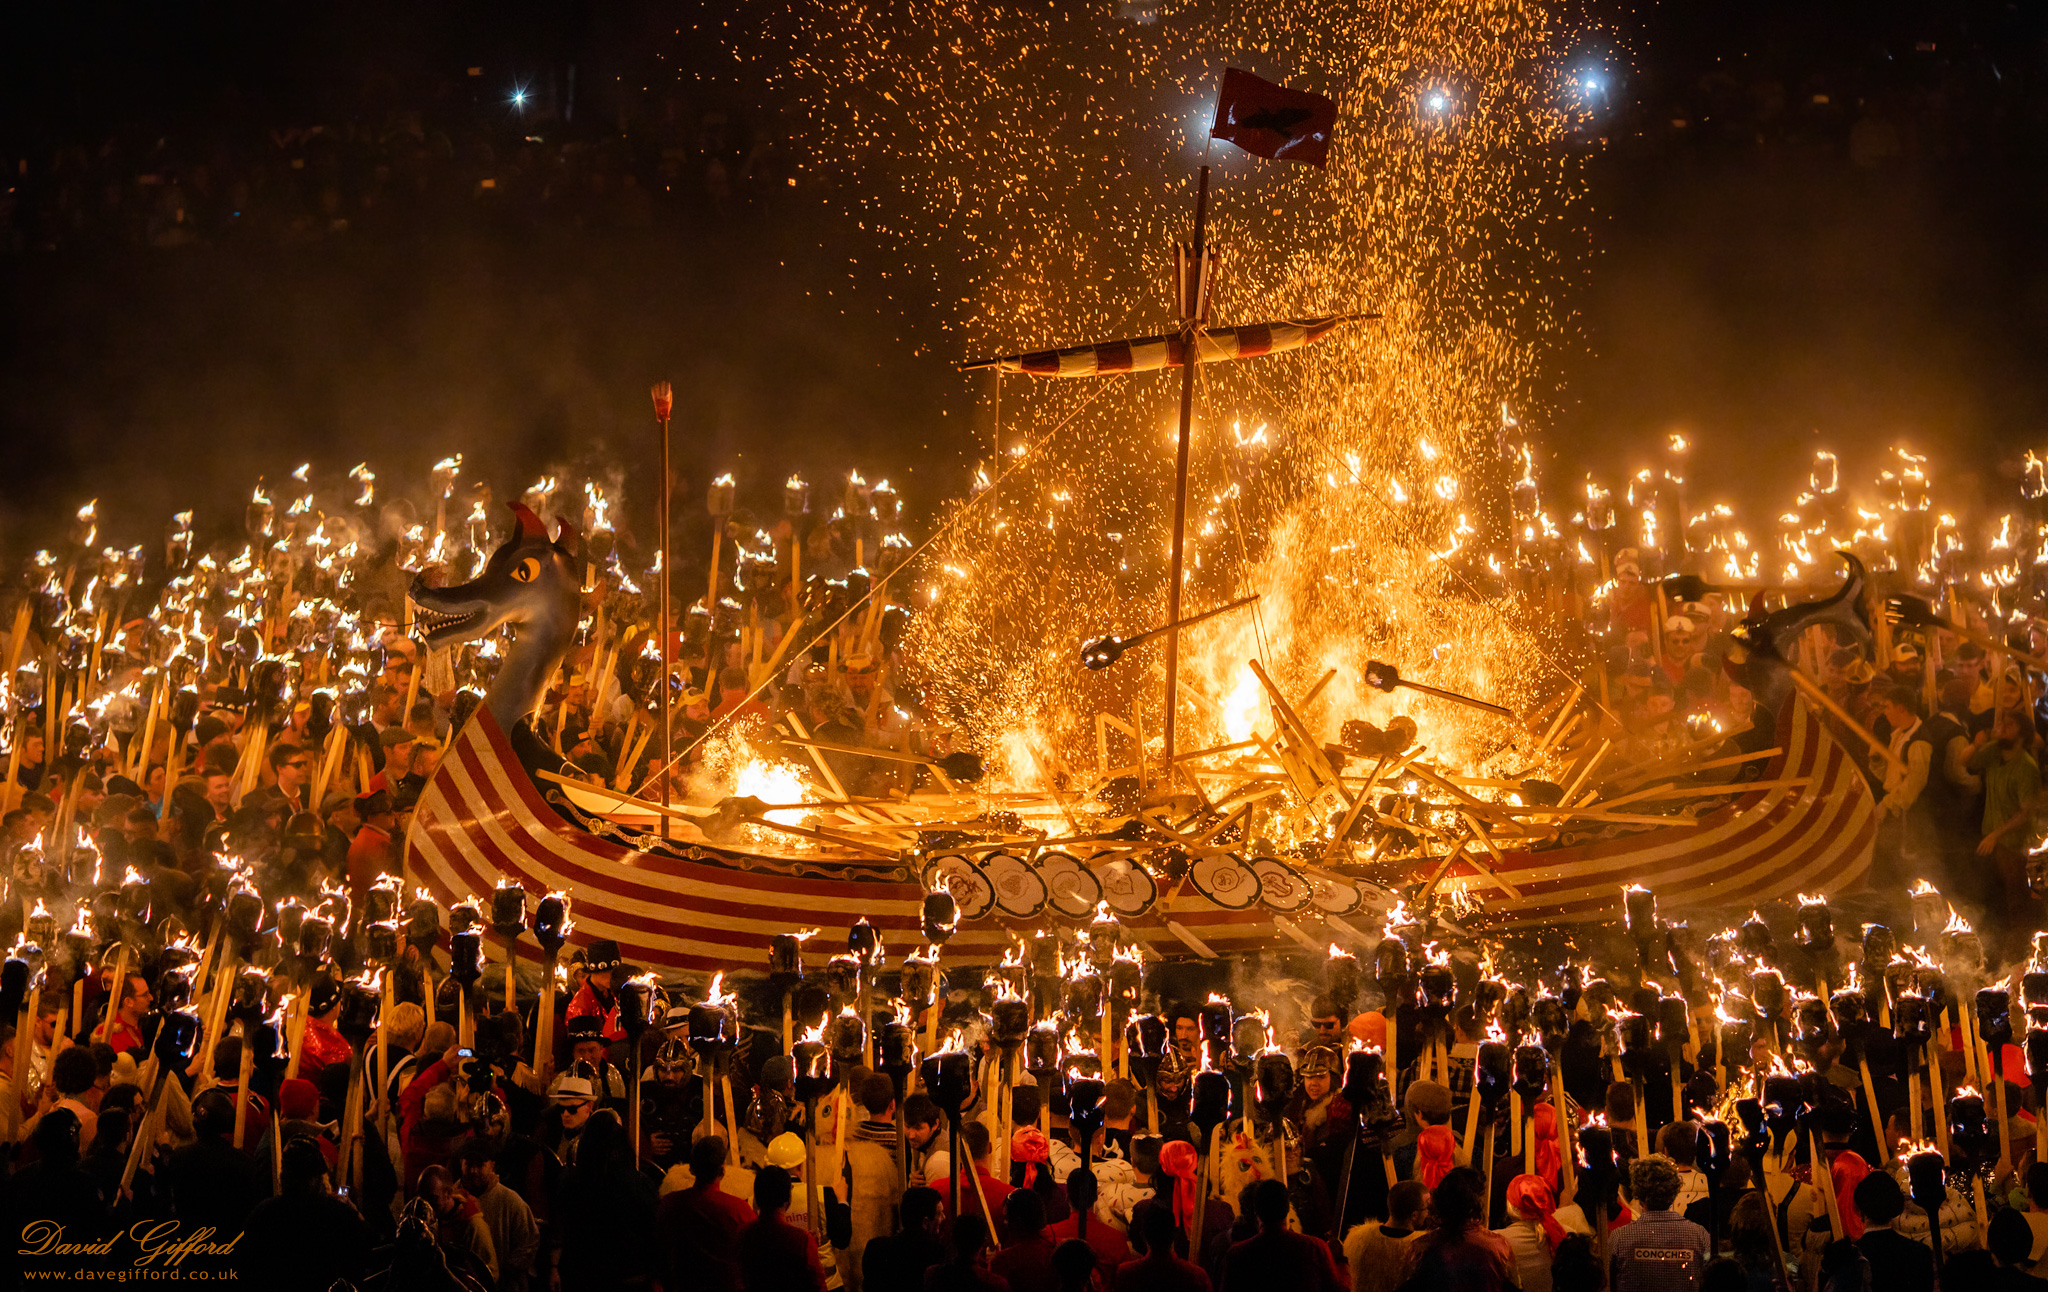 Up Helly Aa 2020: Throwing in the Torches